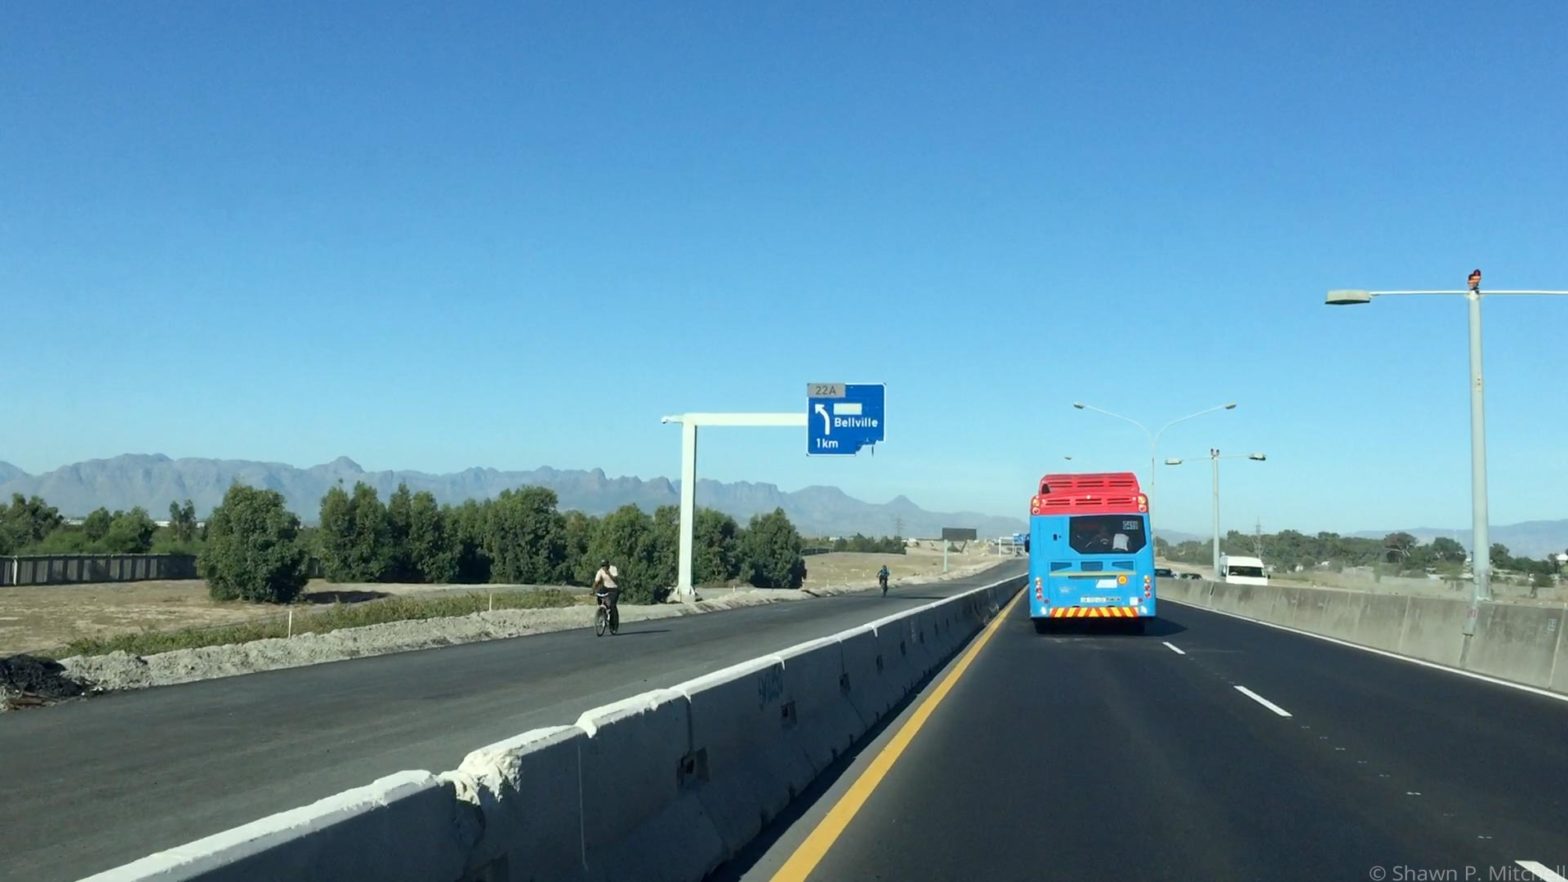 A bus on a highway in South Africa.